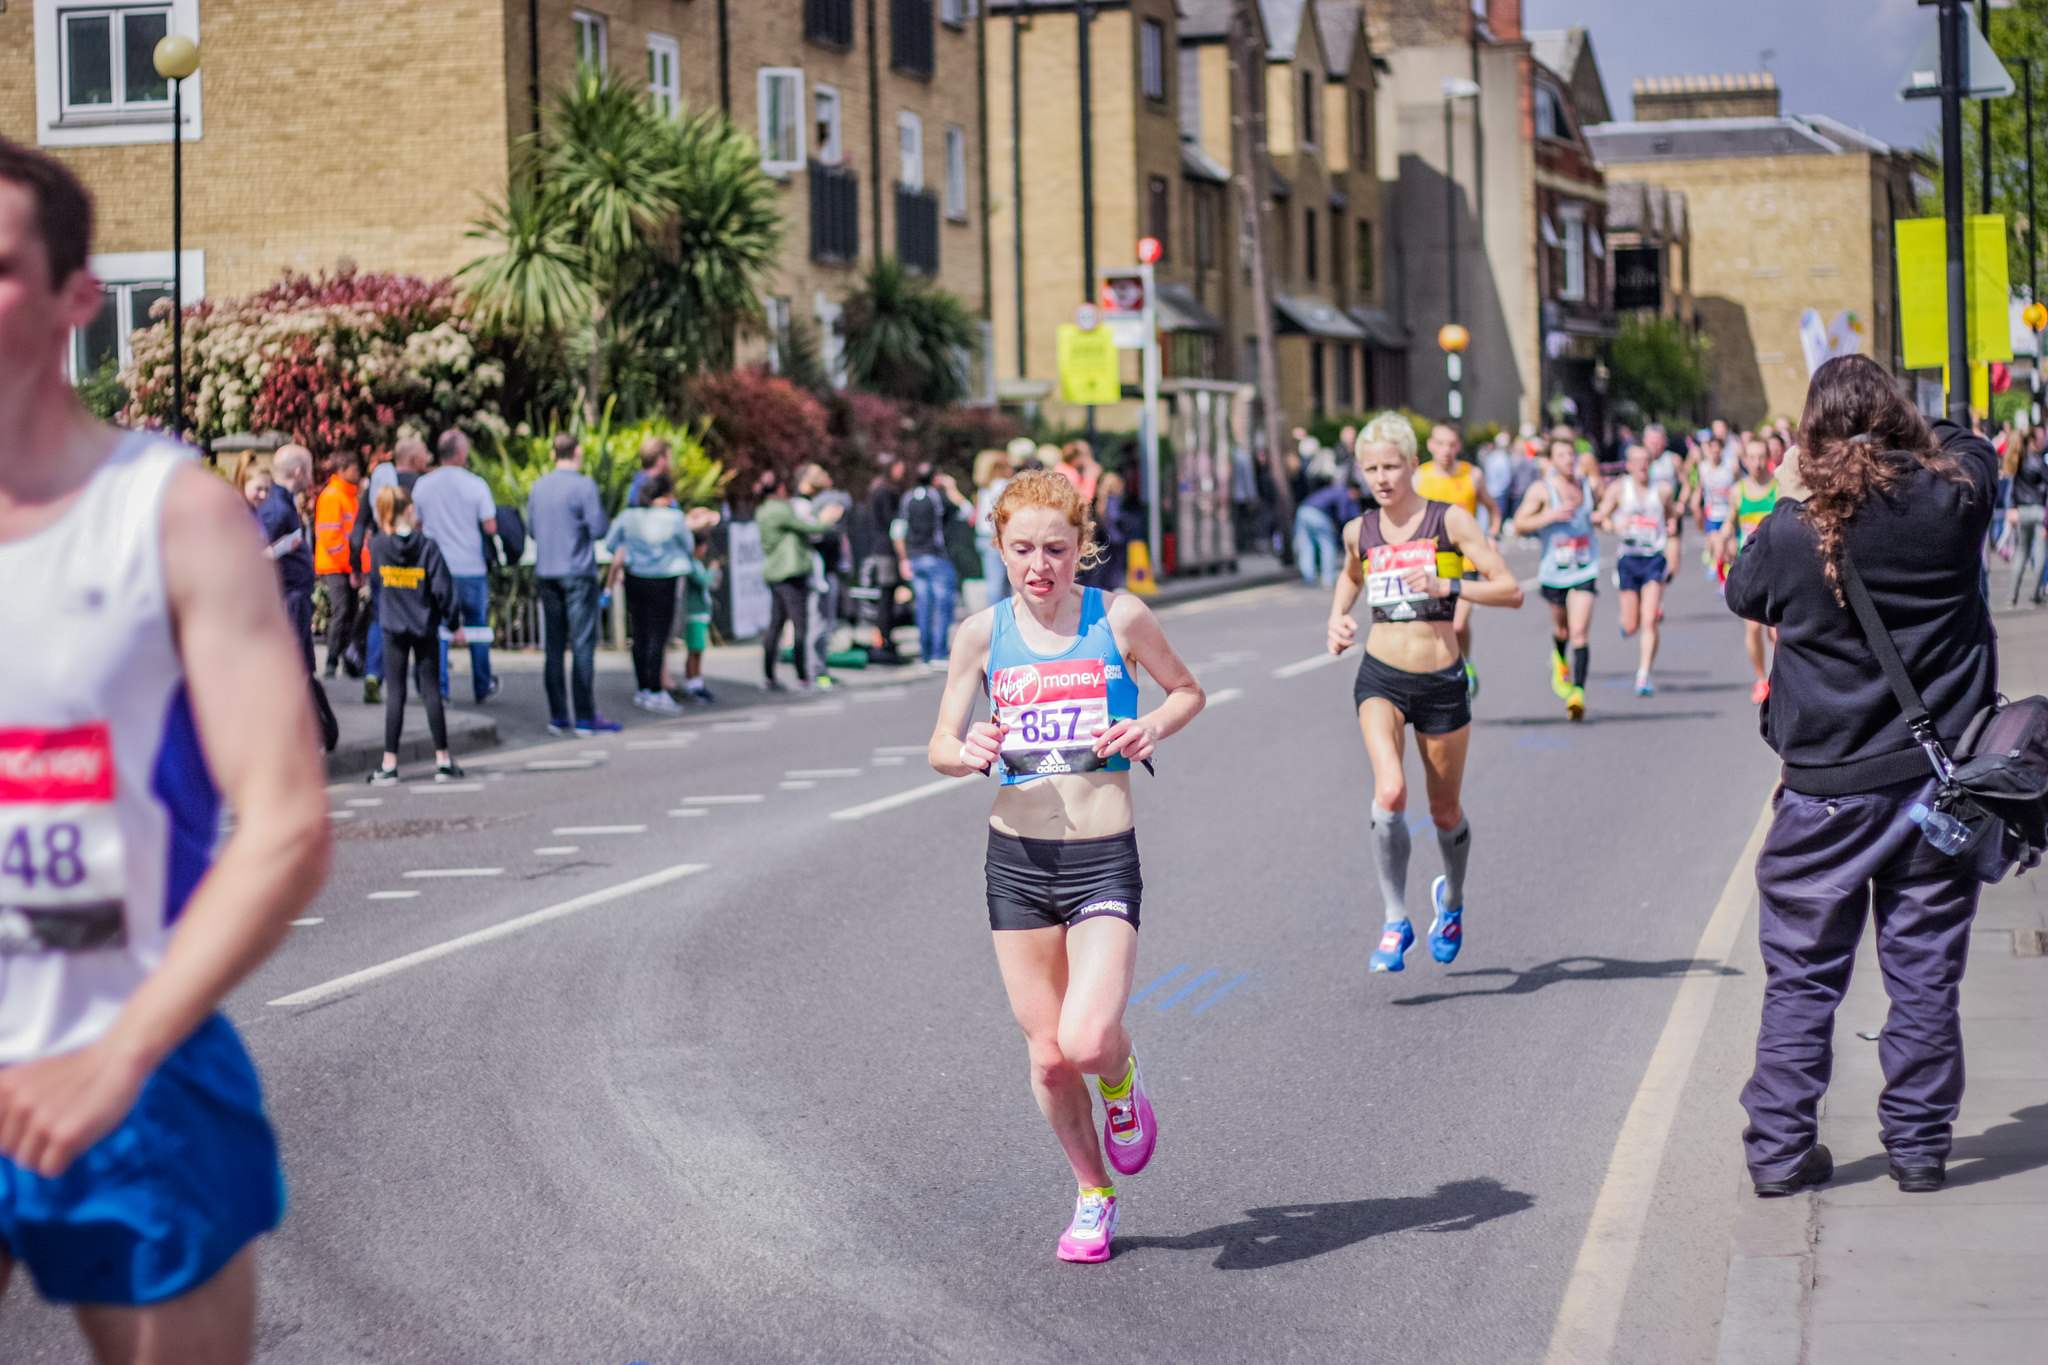 One of the first women on the course, Runner #857, 2017 London Marathon